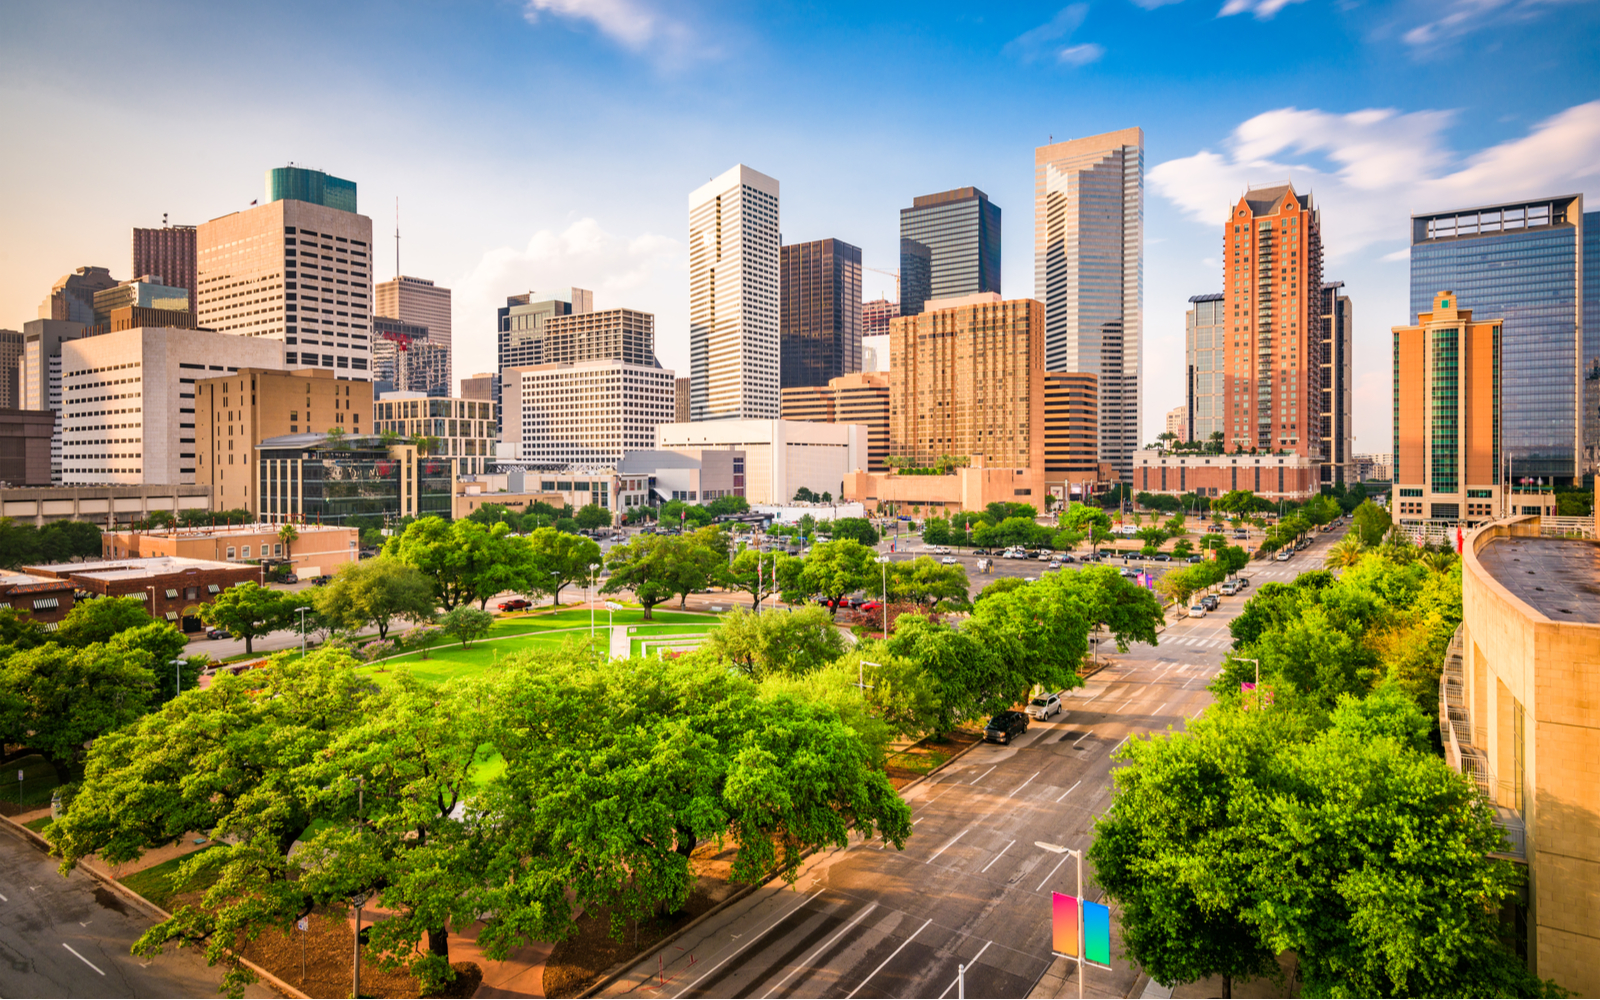 15 Best Things to Do in Houston in 2022